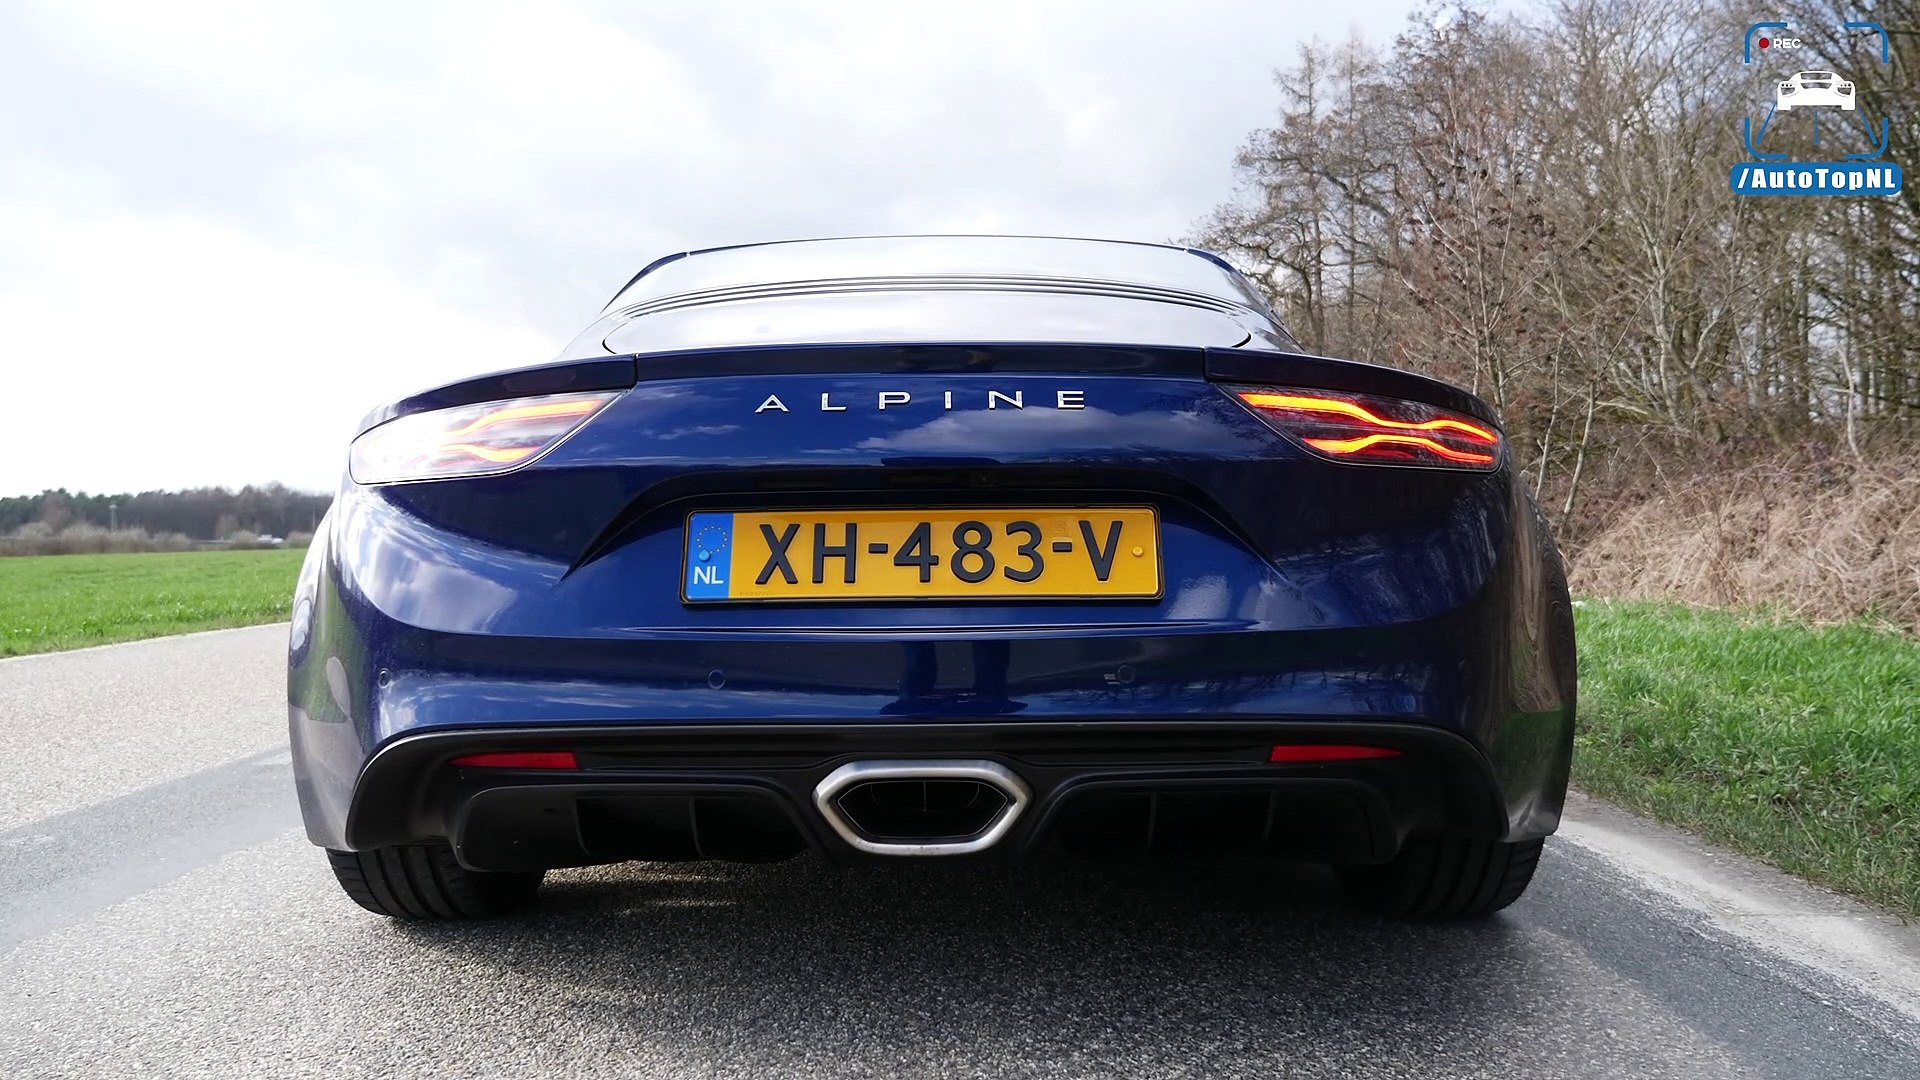 Alpine A110 | Exhaust SOUND REVS & Onboard DRIVE by AutoTopNL